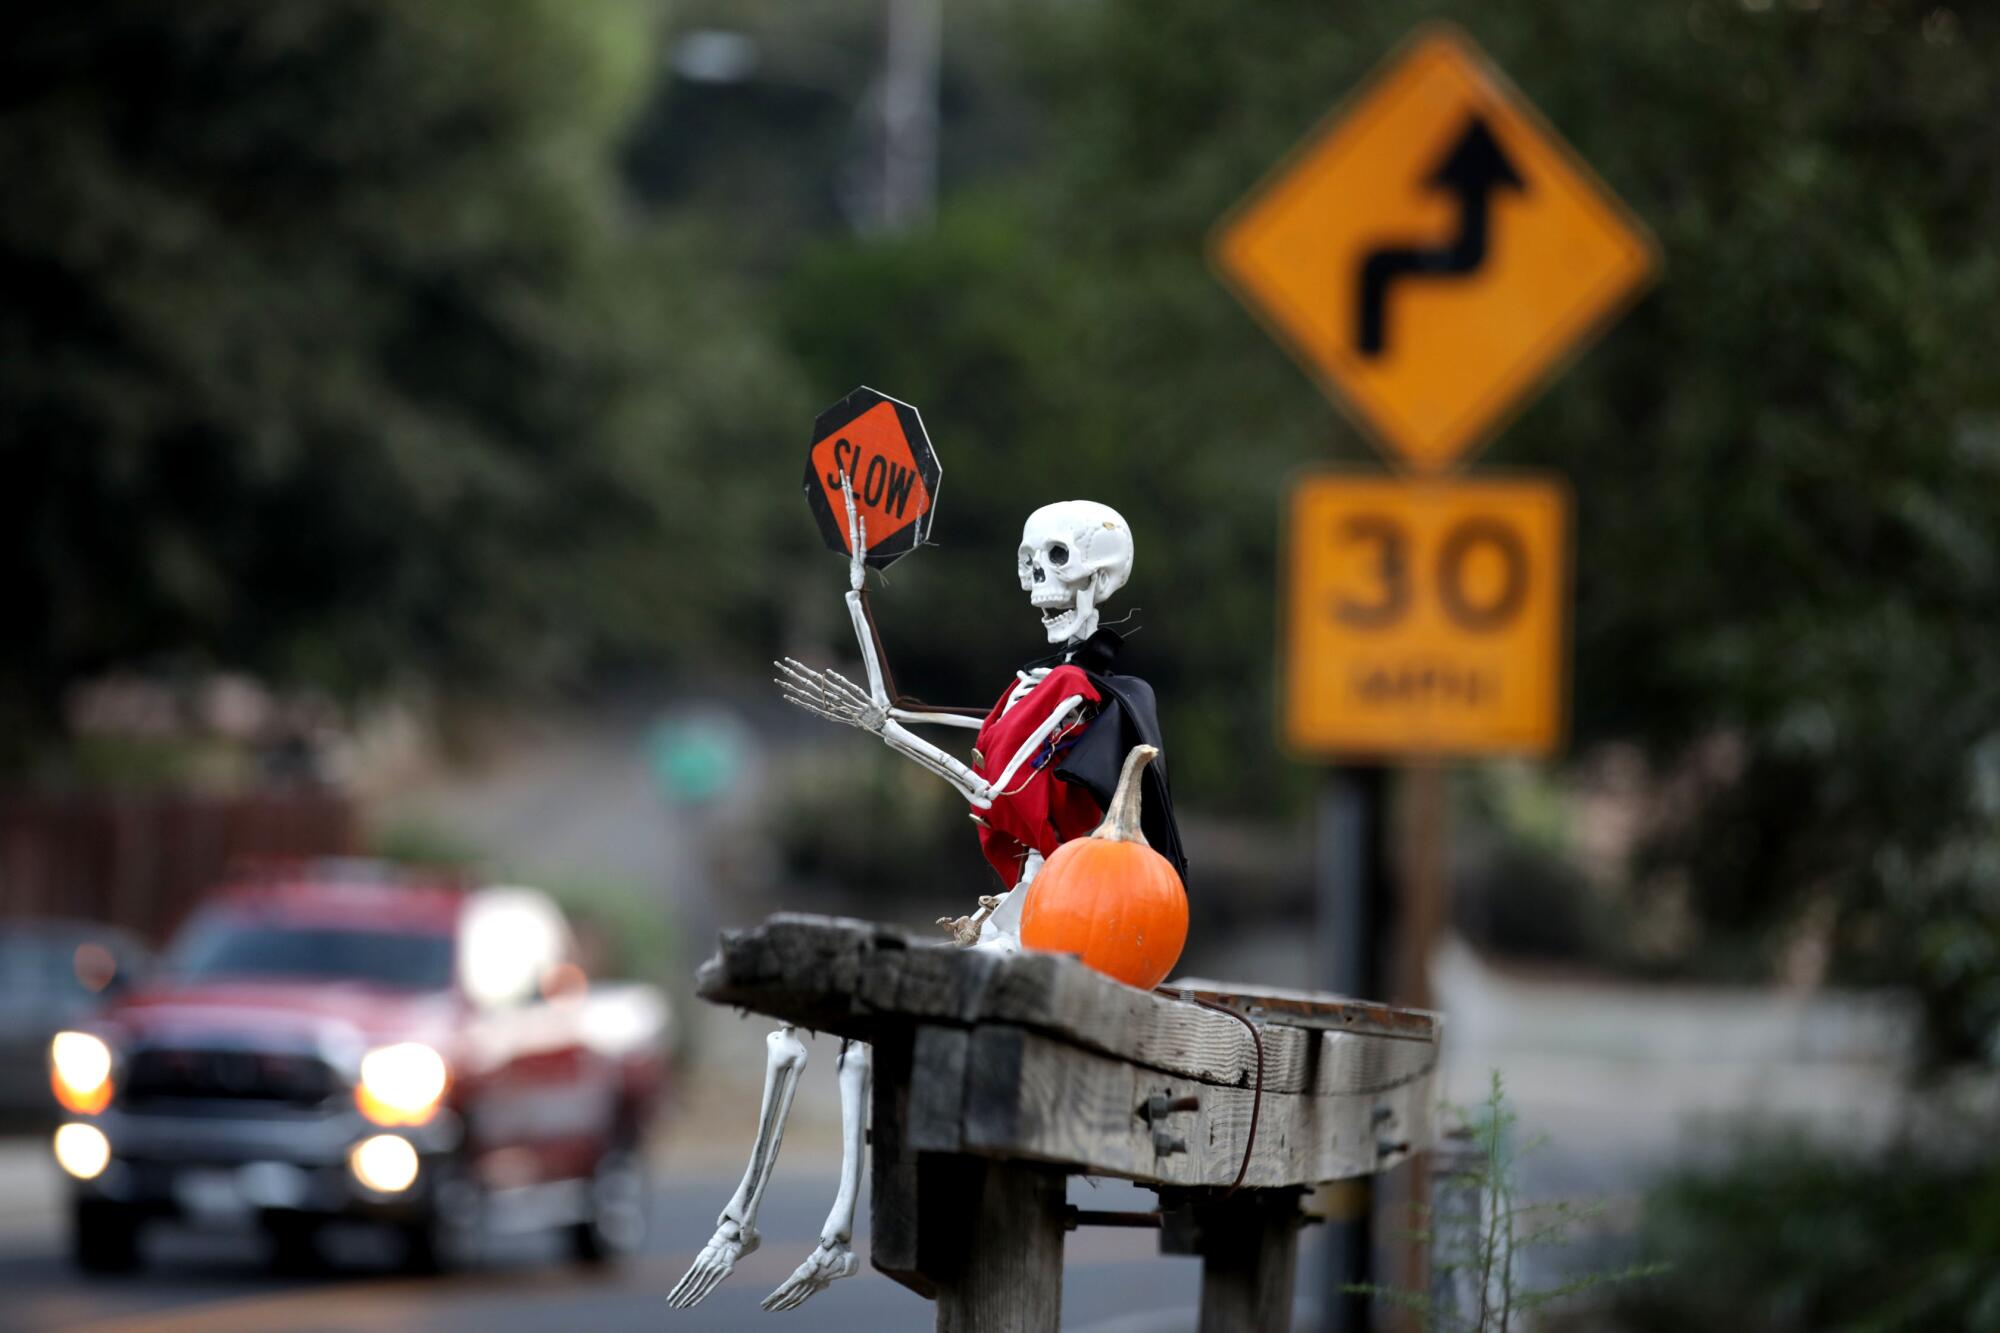 A skeleton perched on a bench encourages motorists to slow down near the Sleepy Hollow community on Carbon Canyon Road